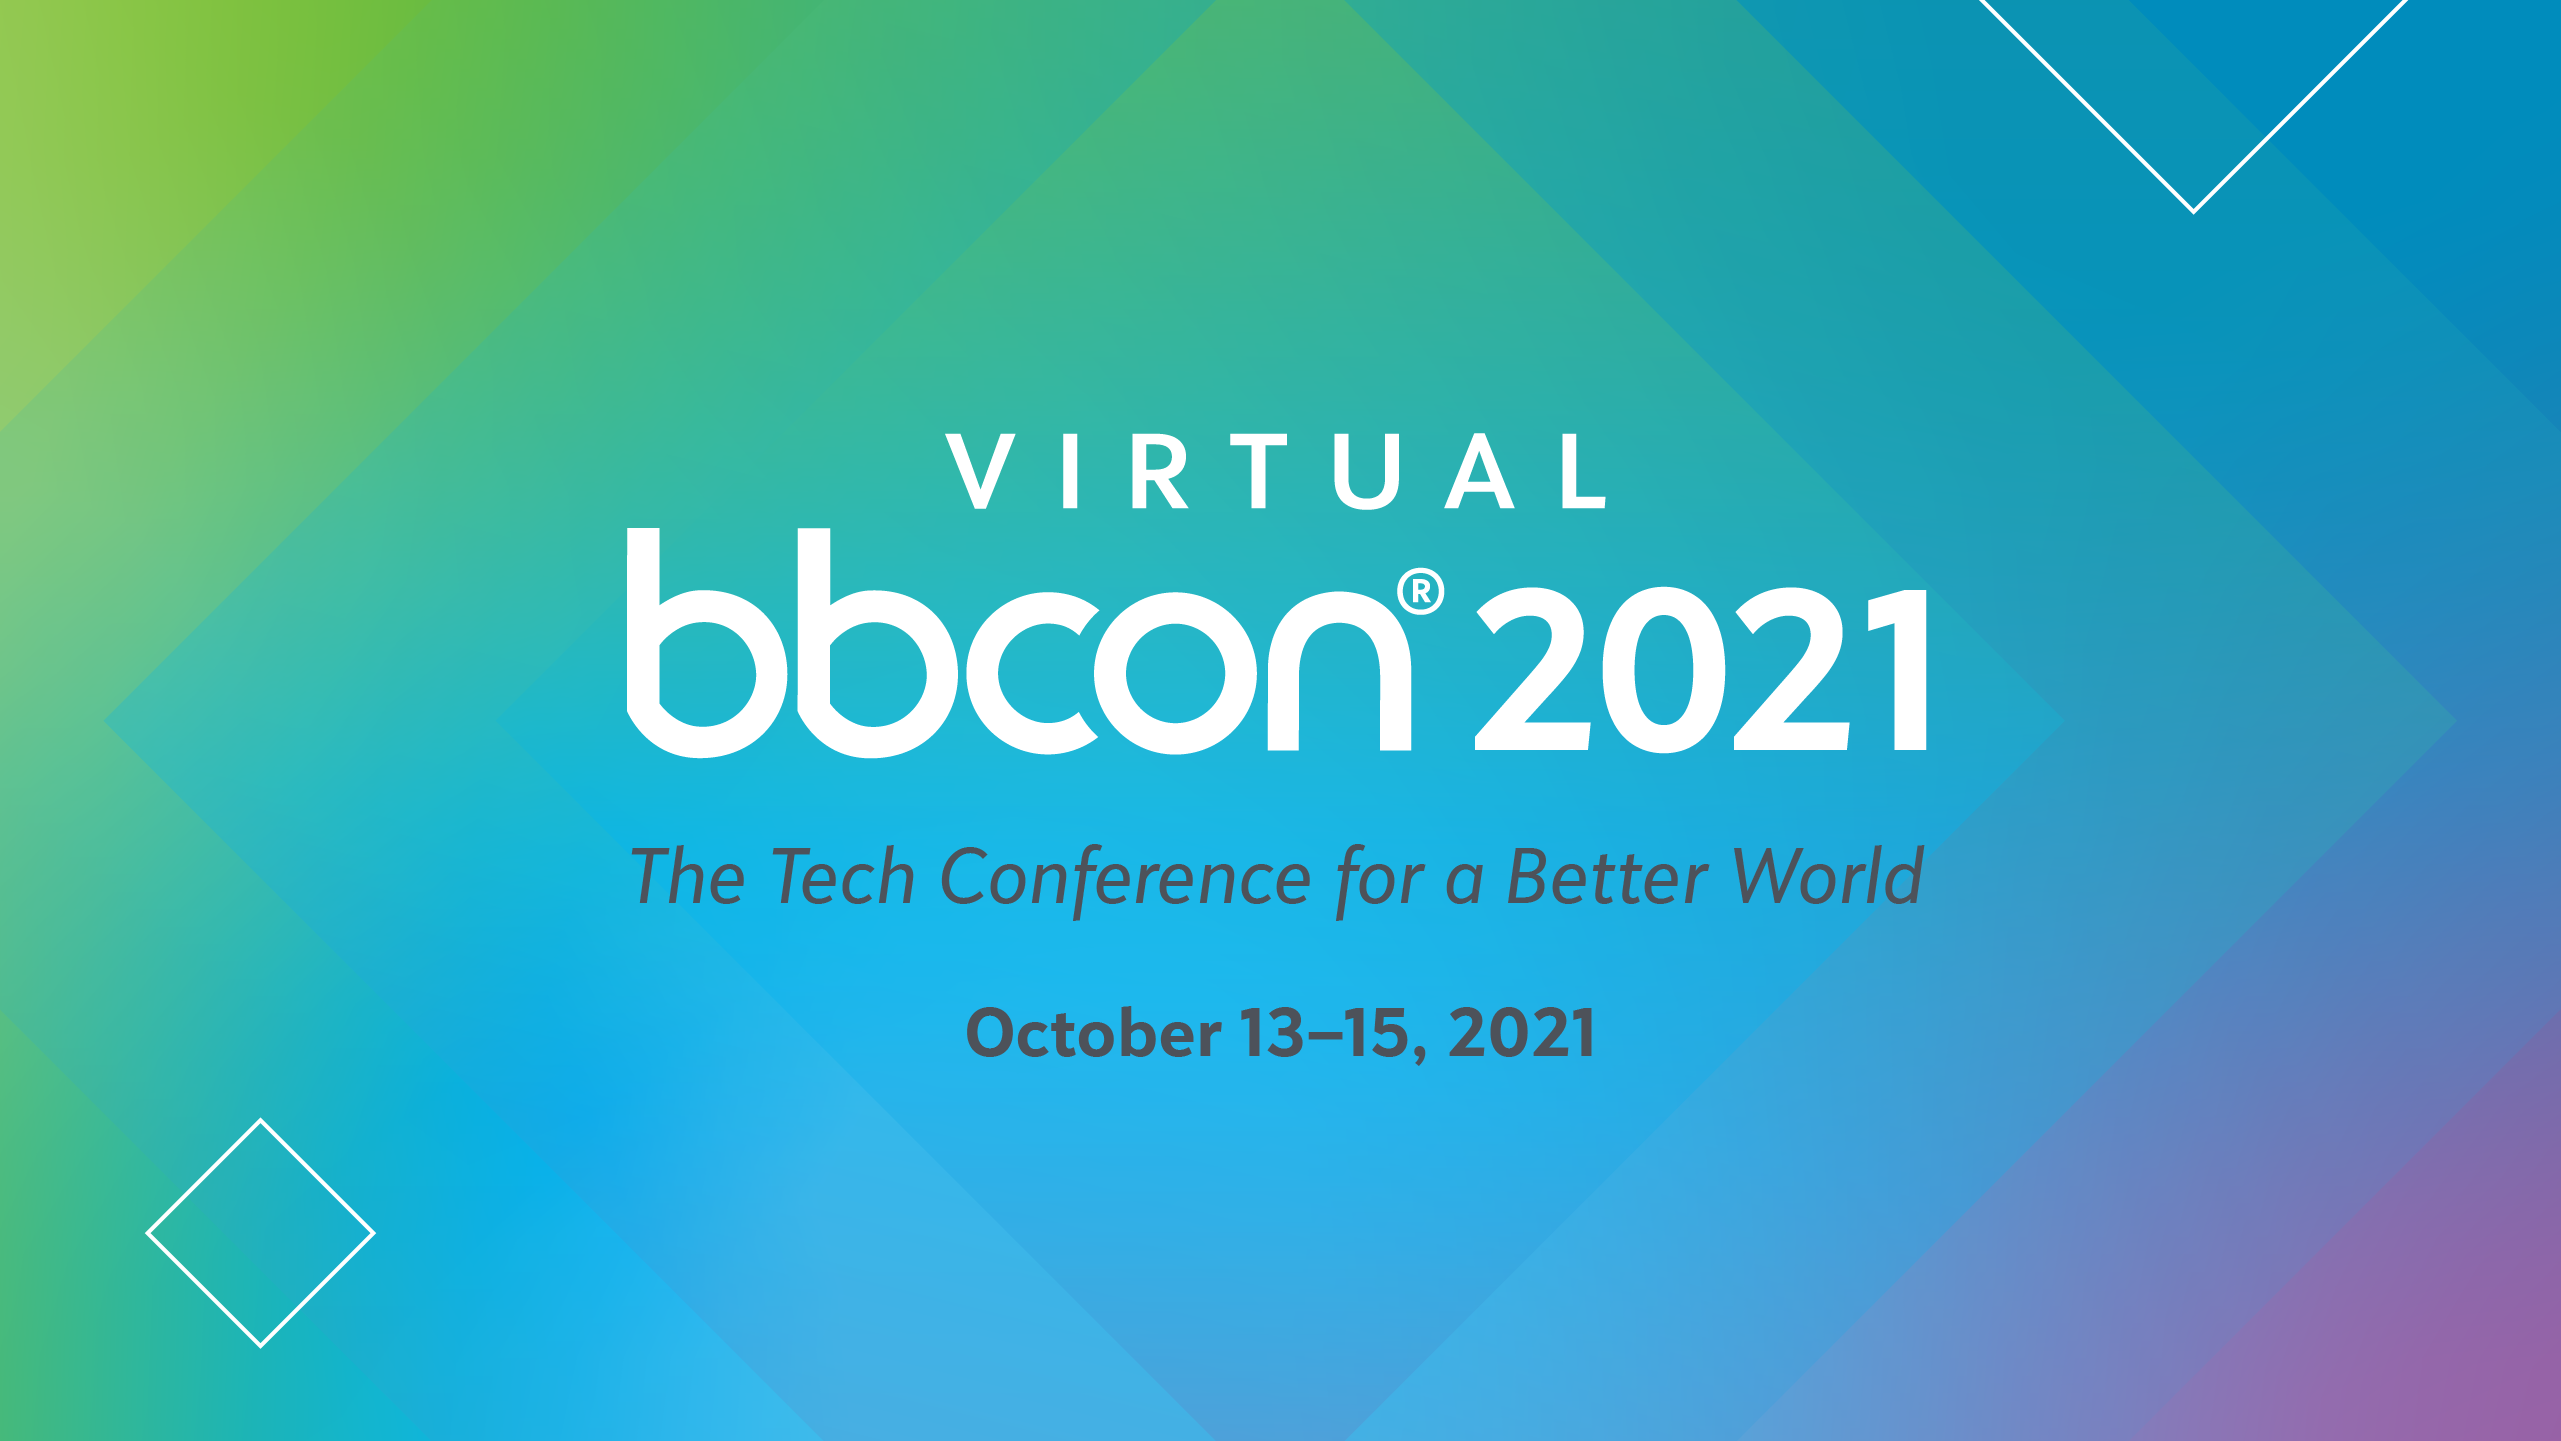 It’s here! bbcon 2021 Virtual registration is now open and FREE for all! 7678